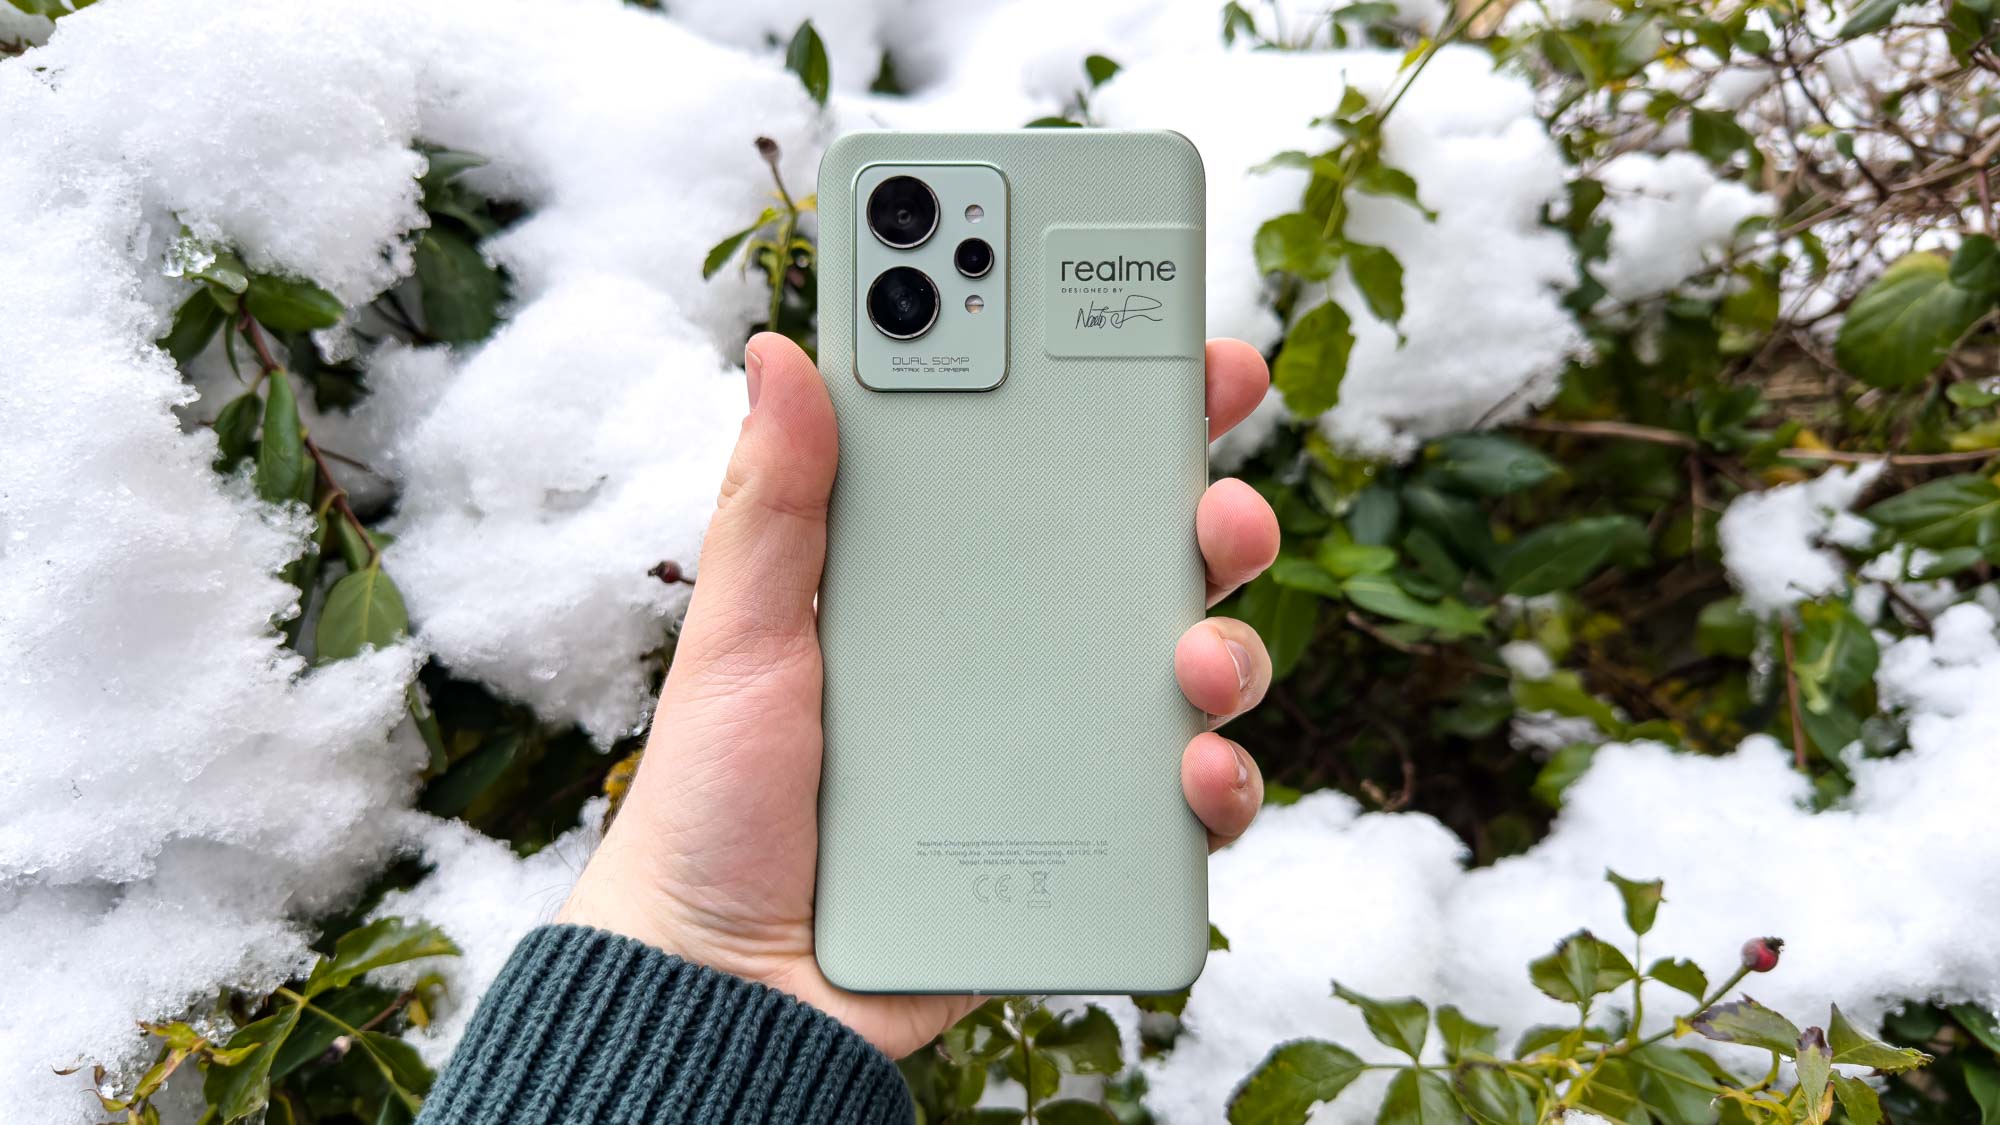 Realme GT 2 Pro in hand, seen from behind